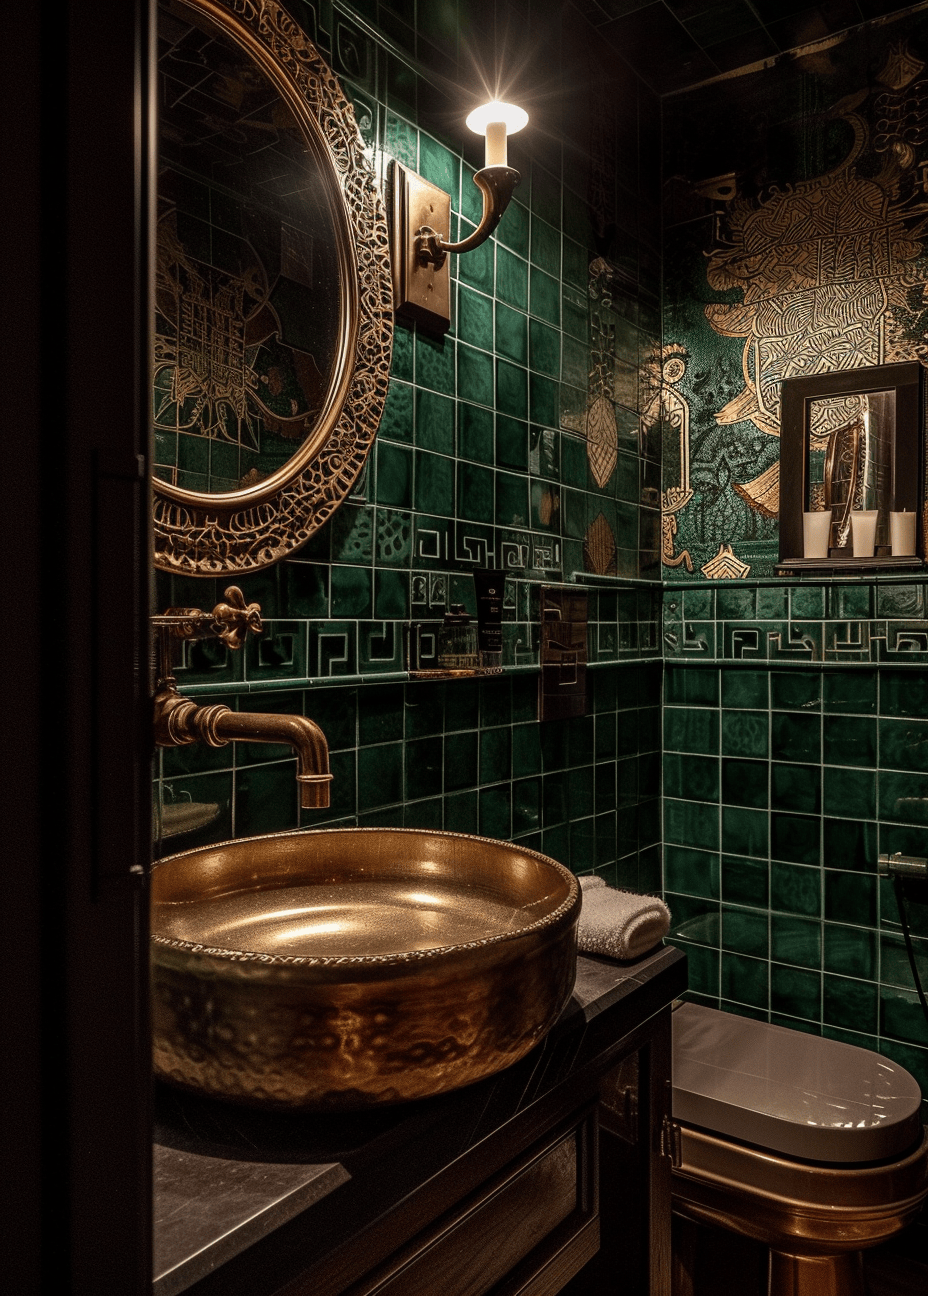 Art Deco bathroom design ideas inspired by the luxurious and glamorous style of the 1920s